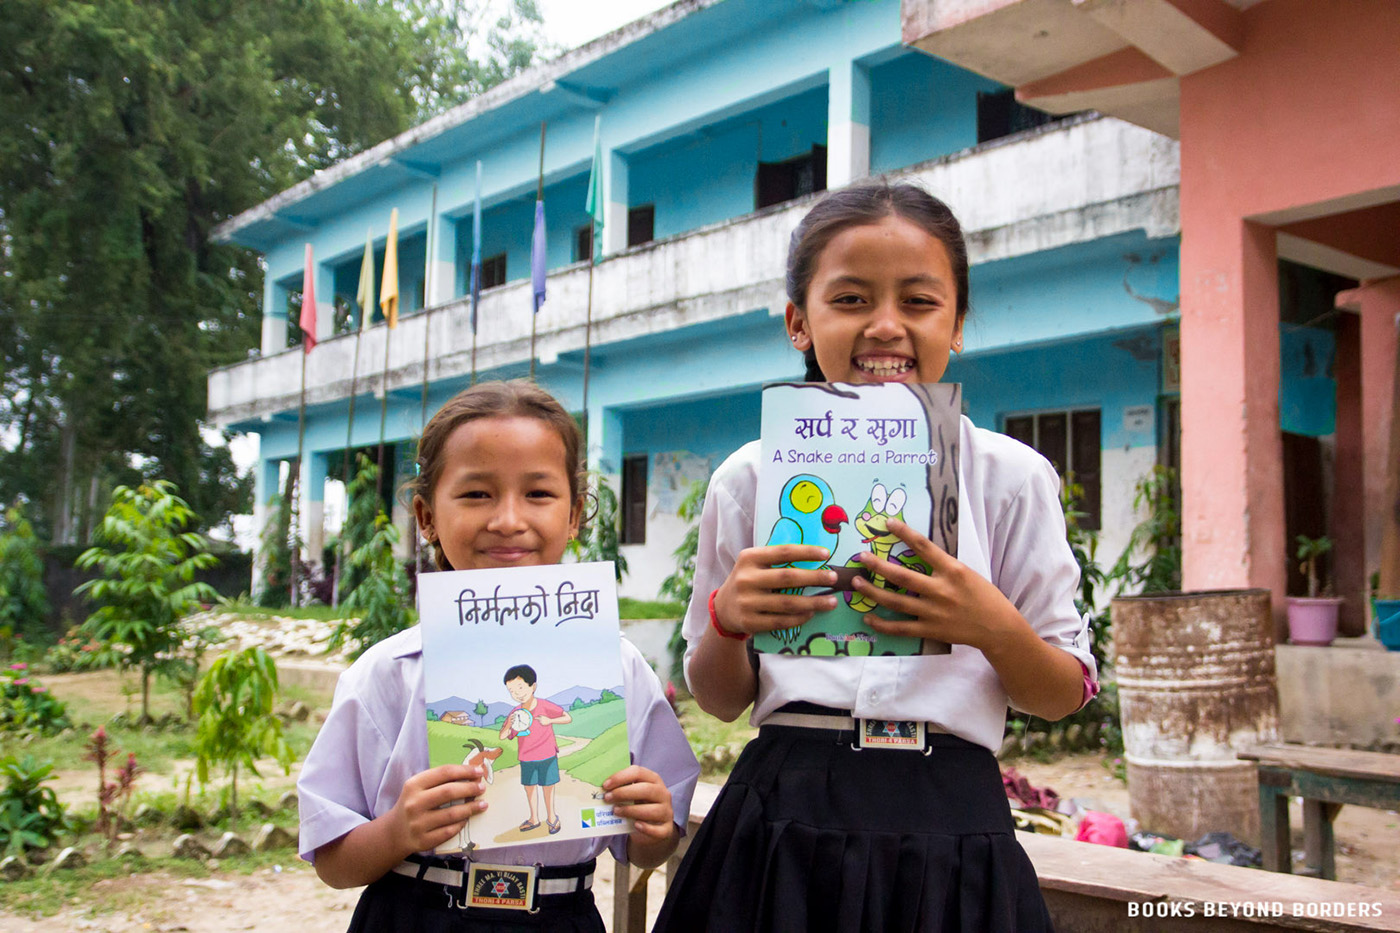 Funds from Books Beyond Borders’ book sales go towards building education capacity in Nepal.